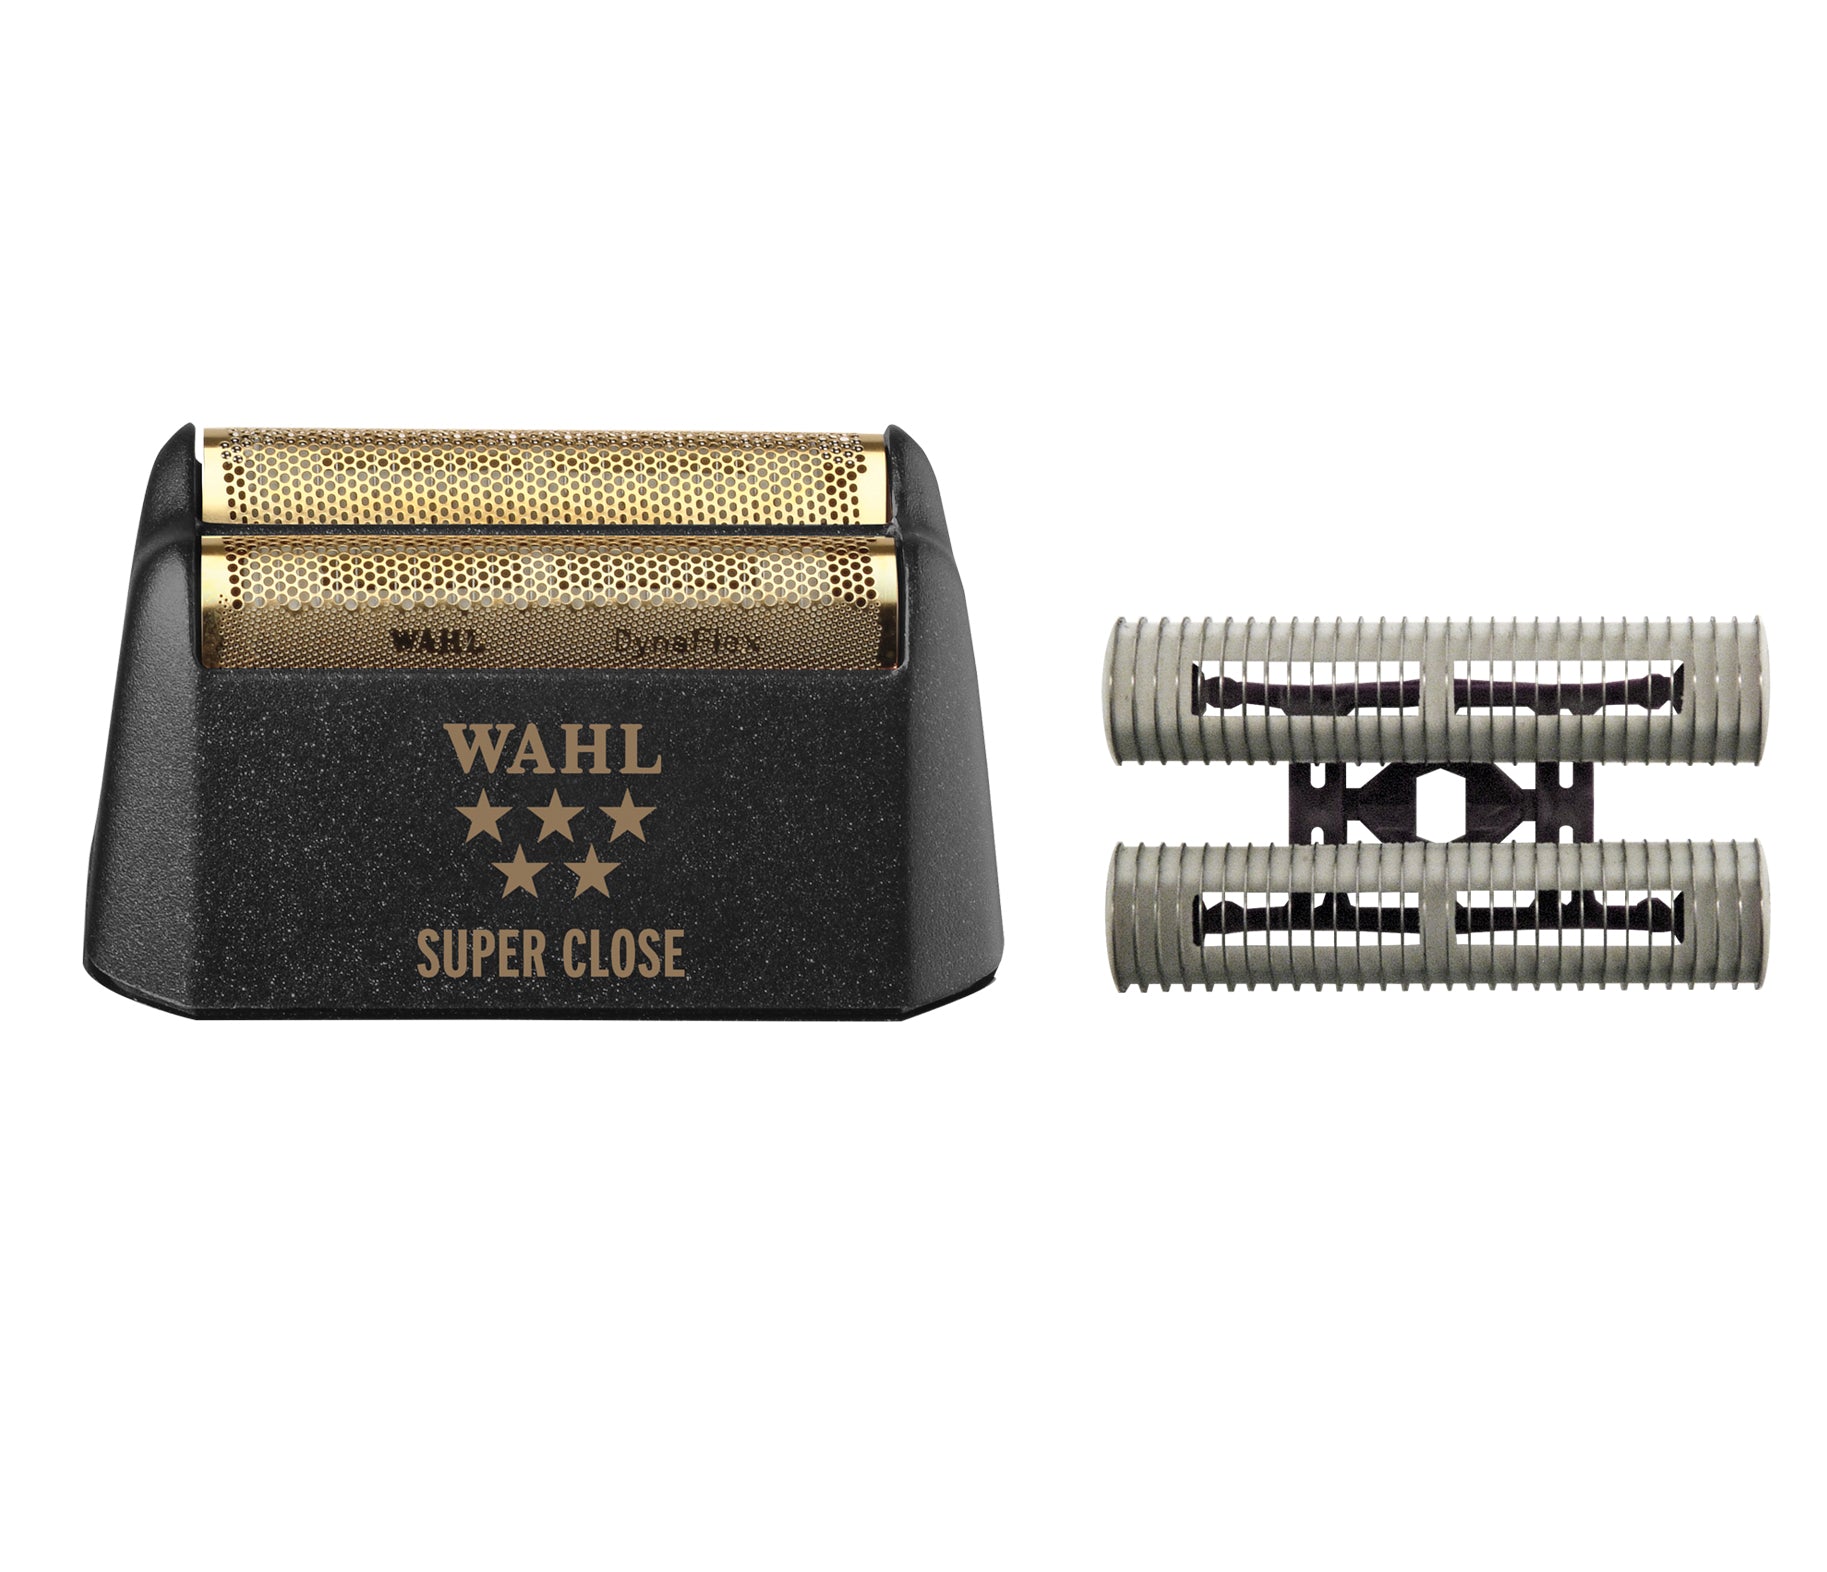 WAHLS 5 STAR LITHIUM FINALE™ REPLACEMENT FOIL &amp; CUTTER BAR ASSEMBLY